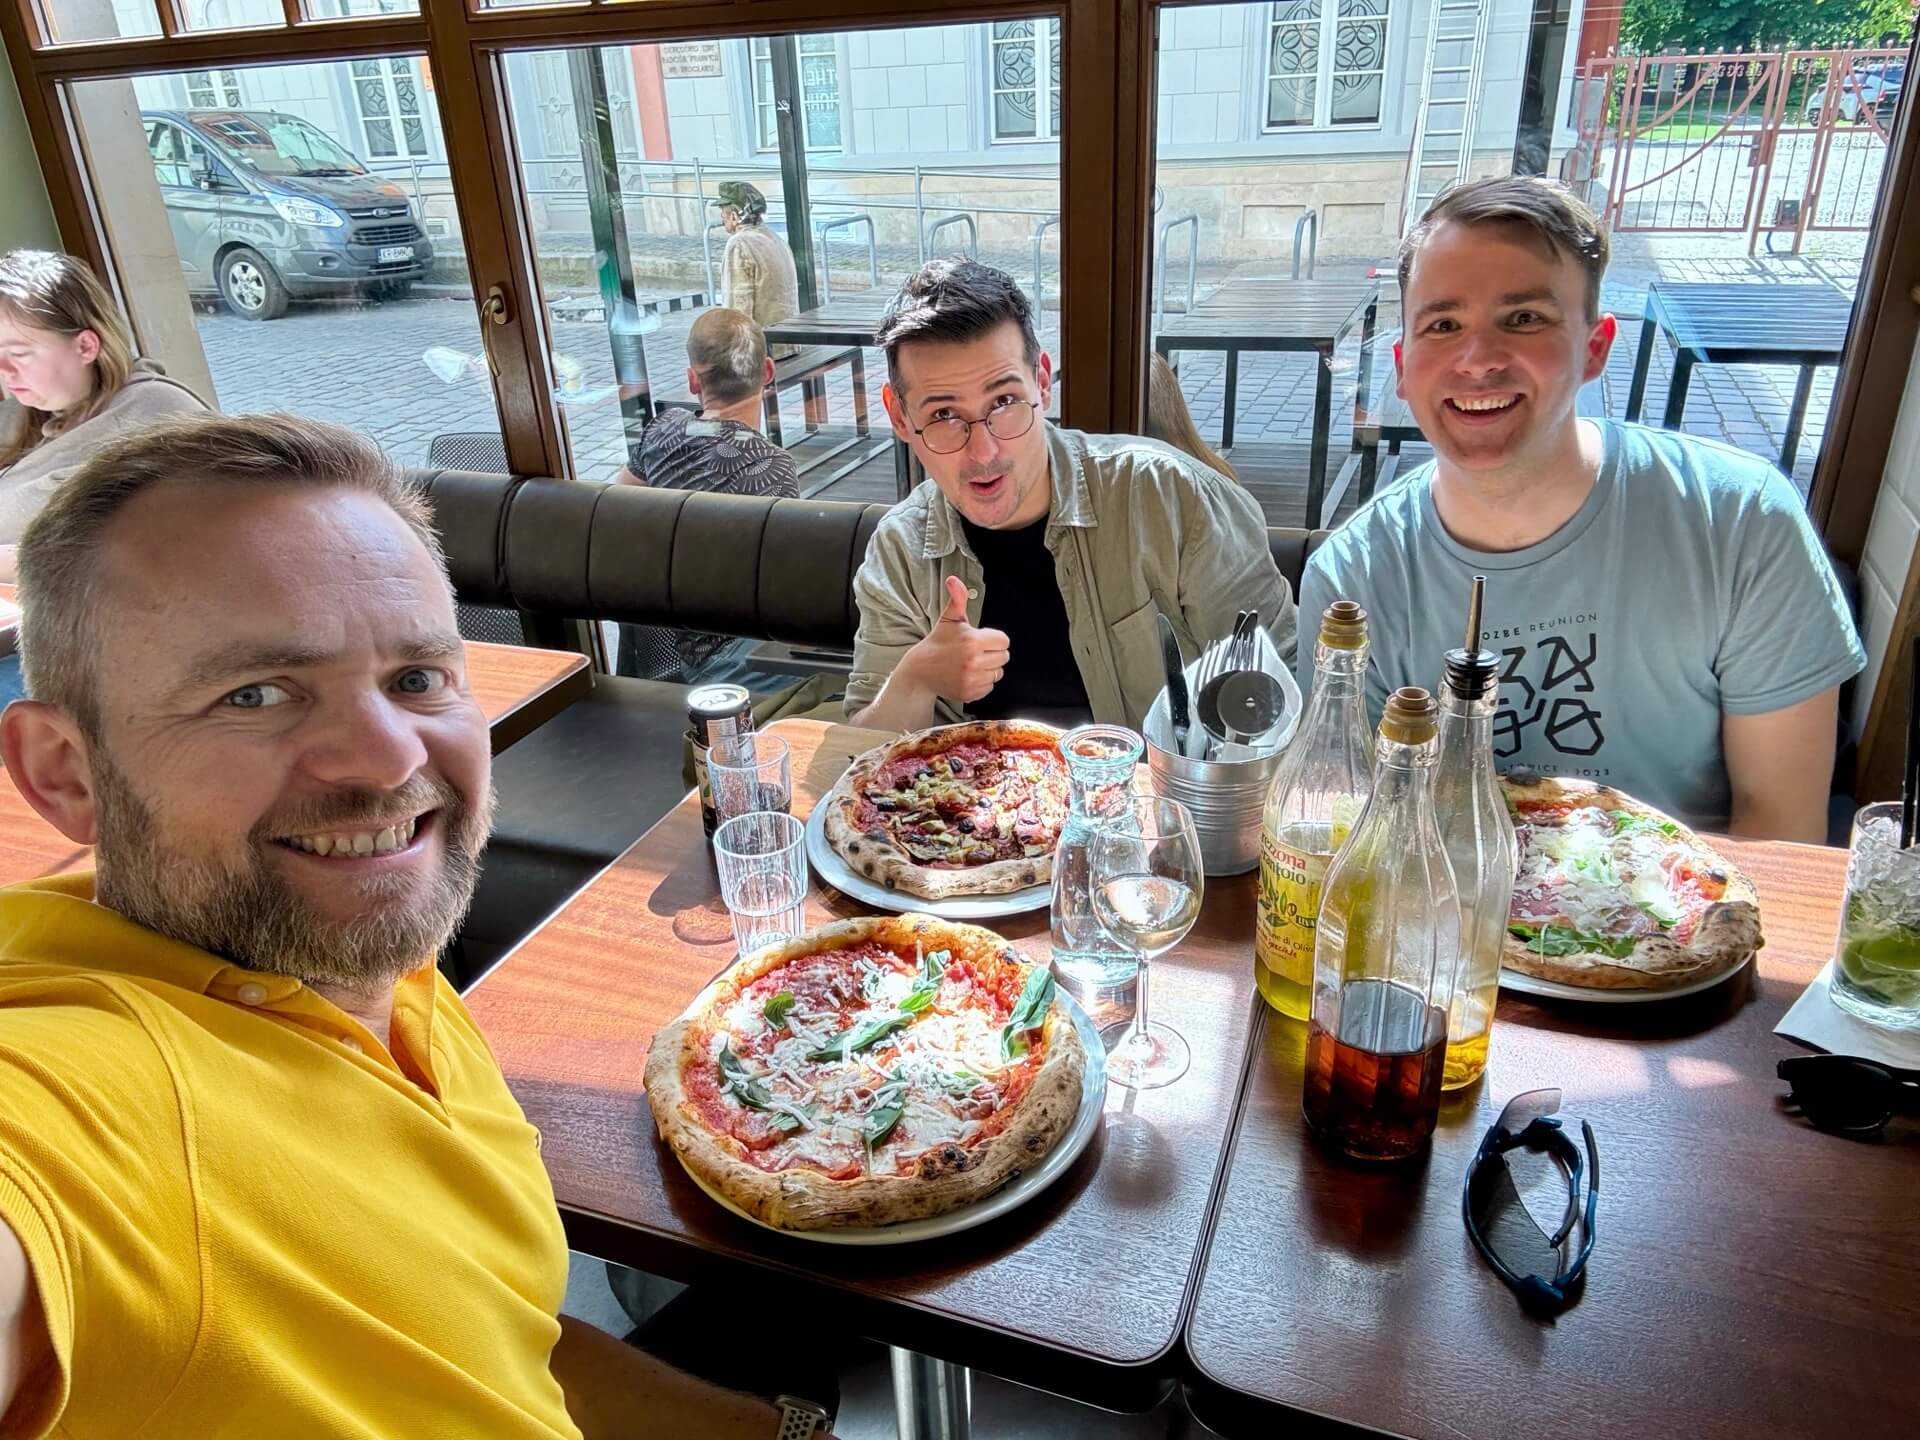 Visiting a city is an opportunity to reconnect with people, especially if you’re working remotely pizza